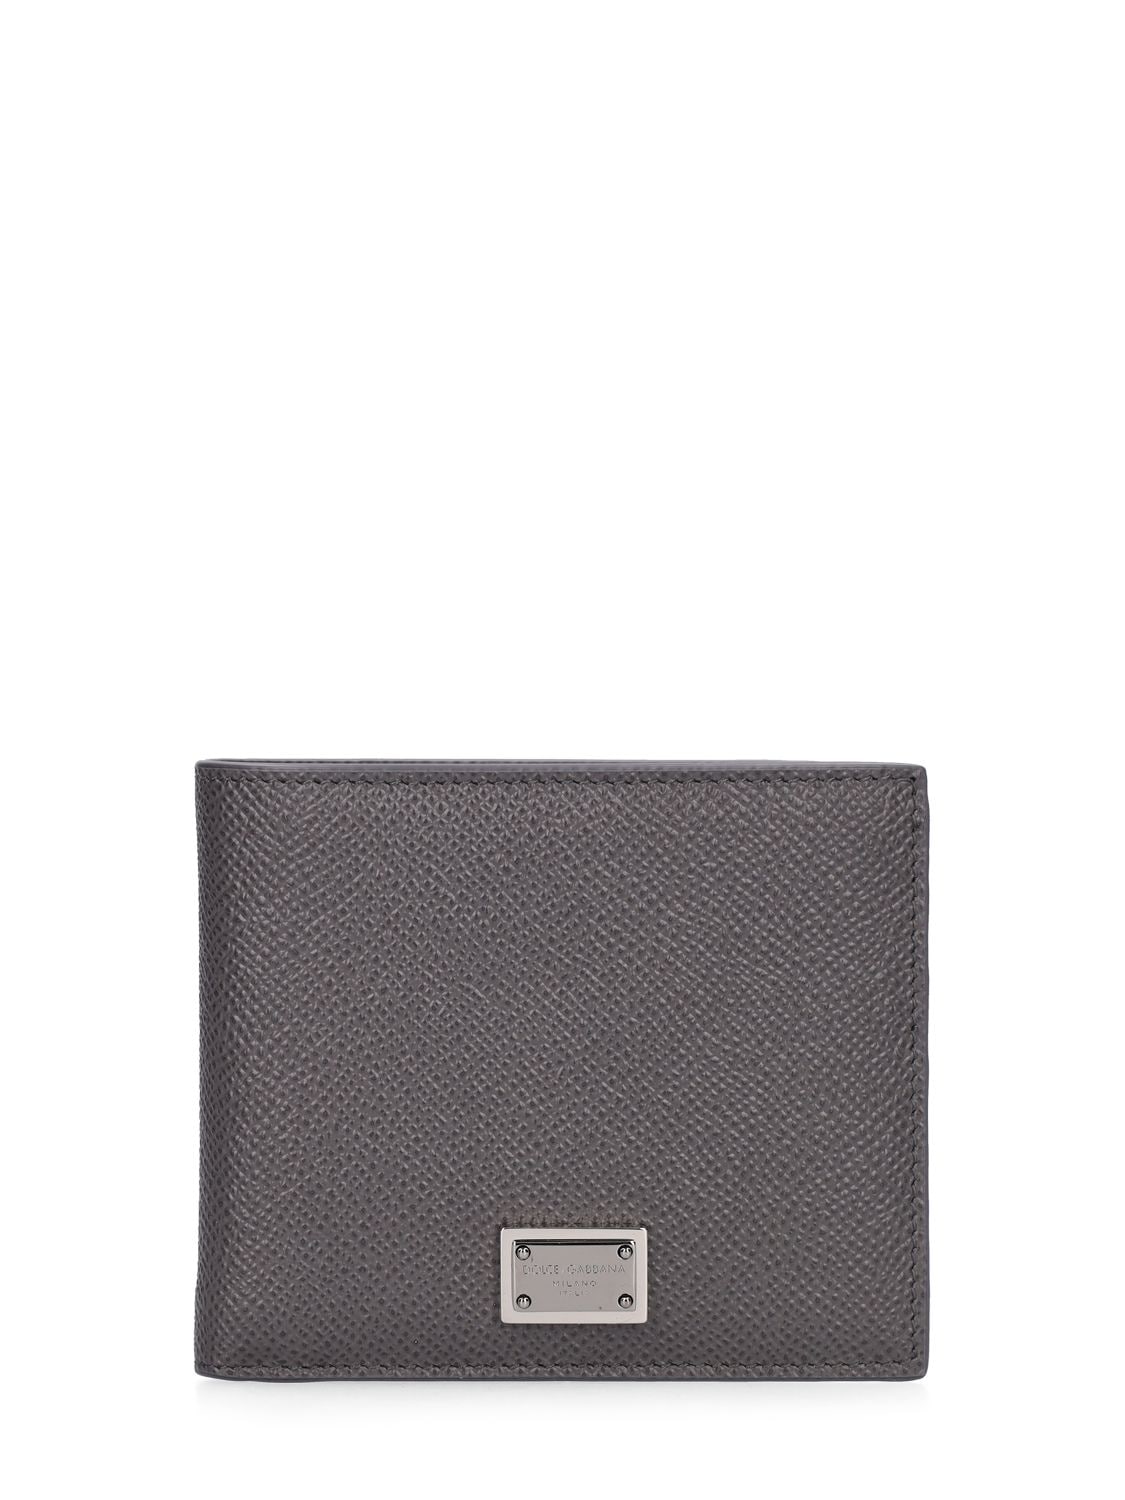 Dolce & Gabbana Logo Plaque Leather Wallet In Canna Fucile